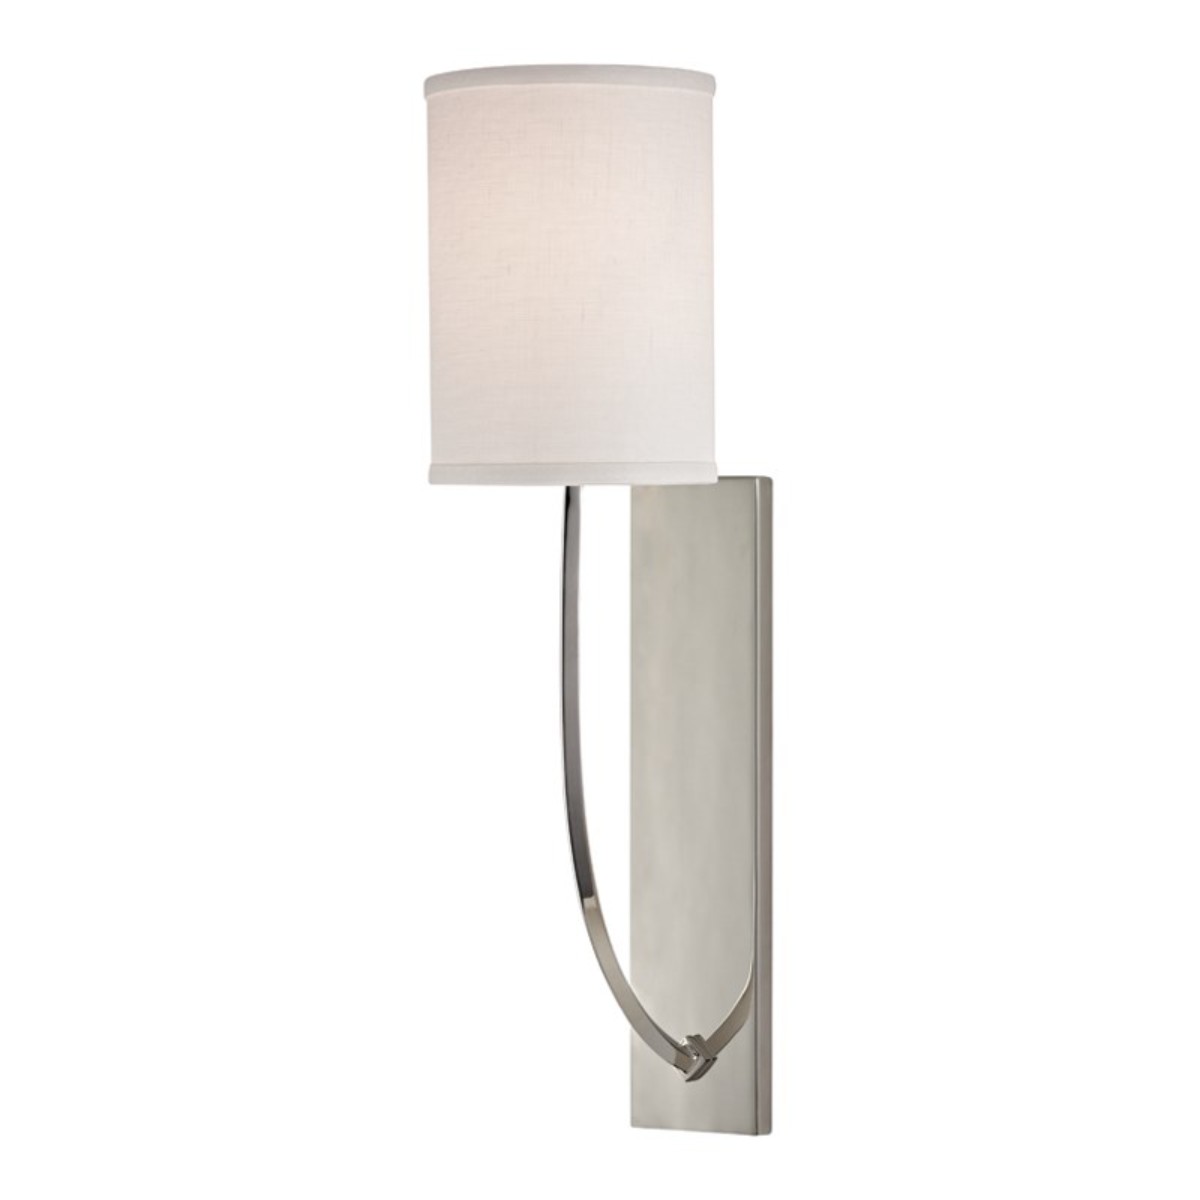 Hudson Valley | Colton Wall Light | Polished Nickel